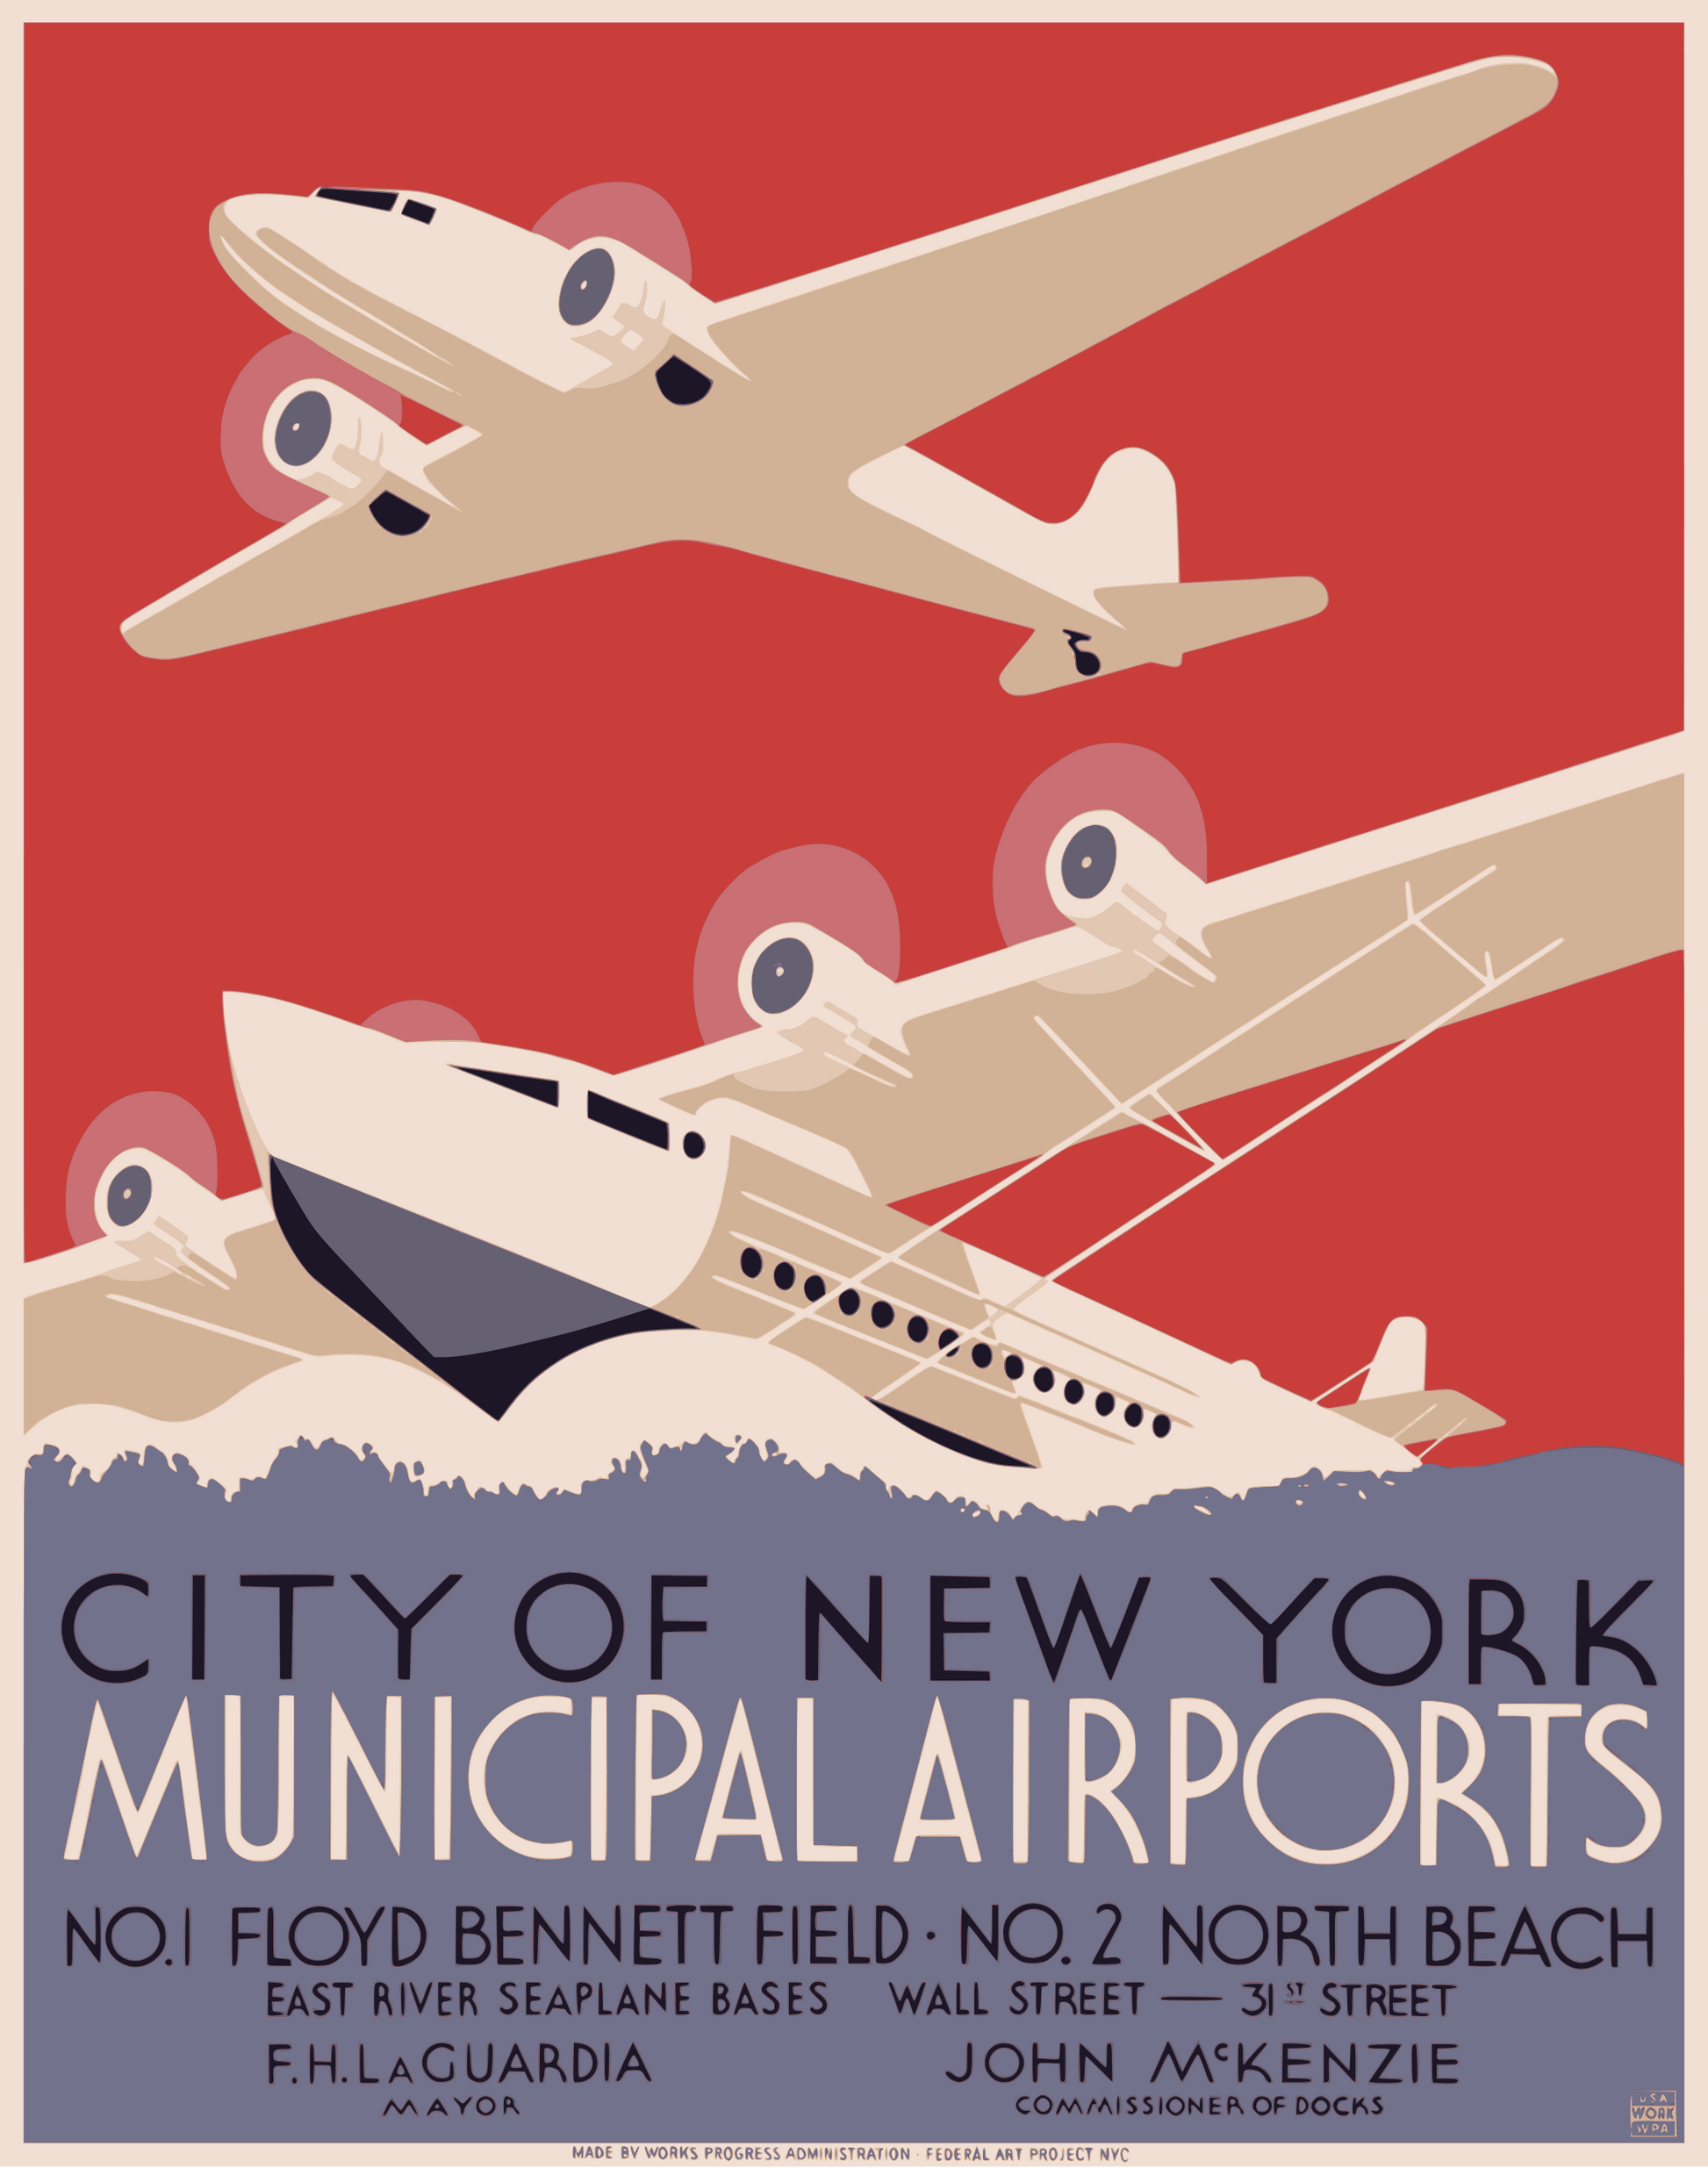 New York Airports Poster (1930s) | Vintage travel posters | Harry Herzog Posters, Prints, & Visual Artwork The Trumpet Shop   